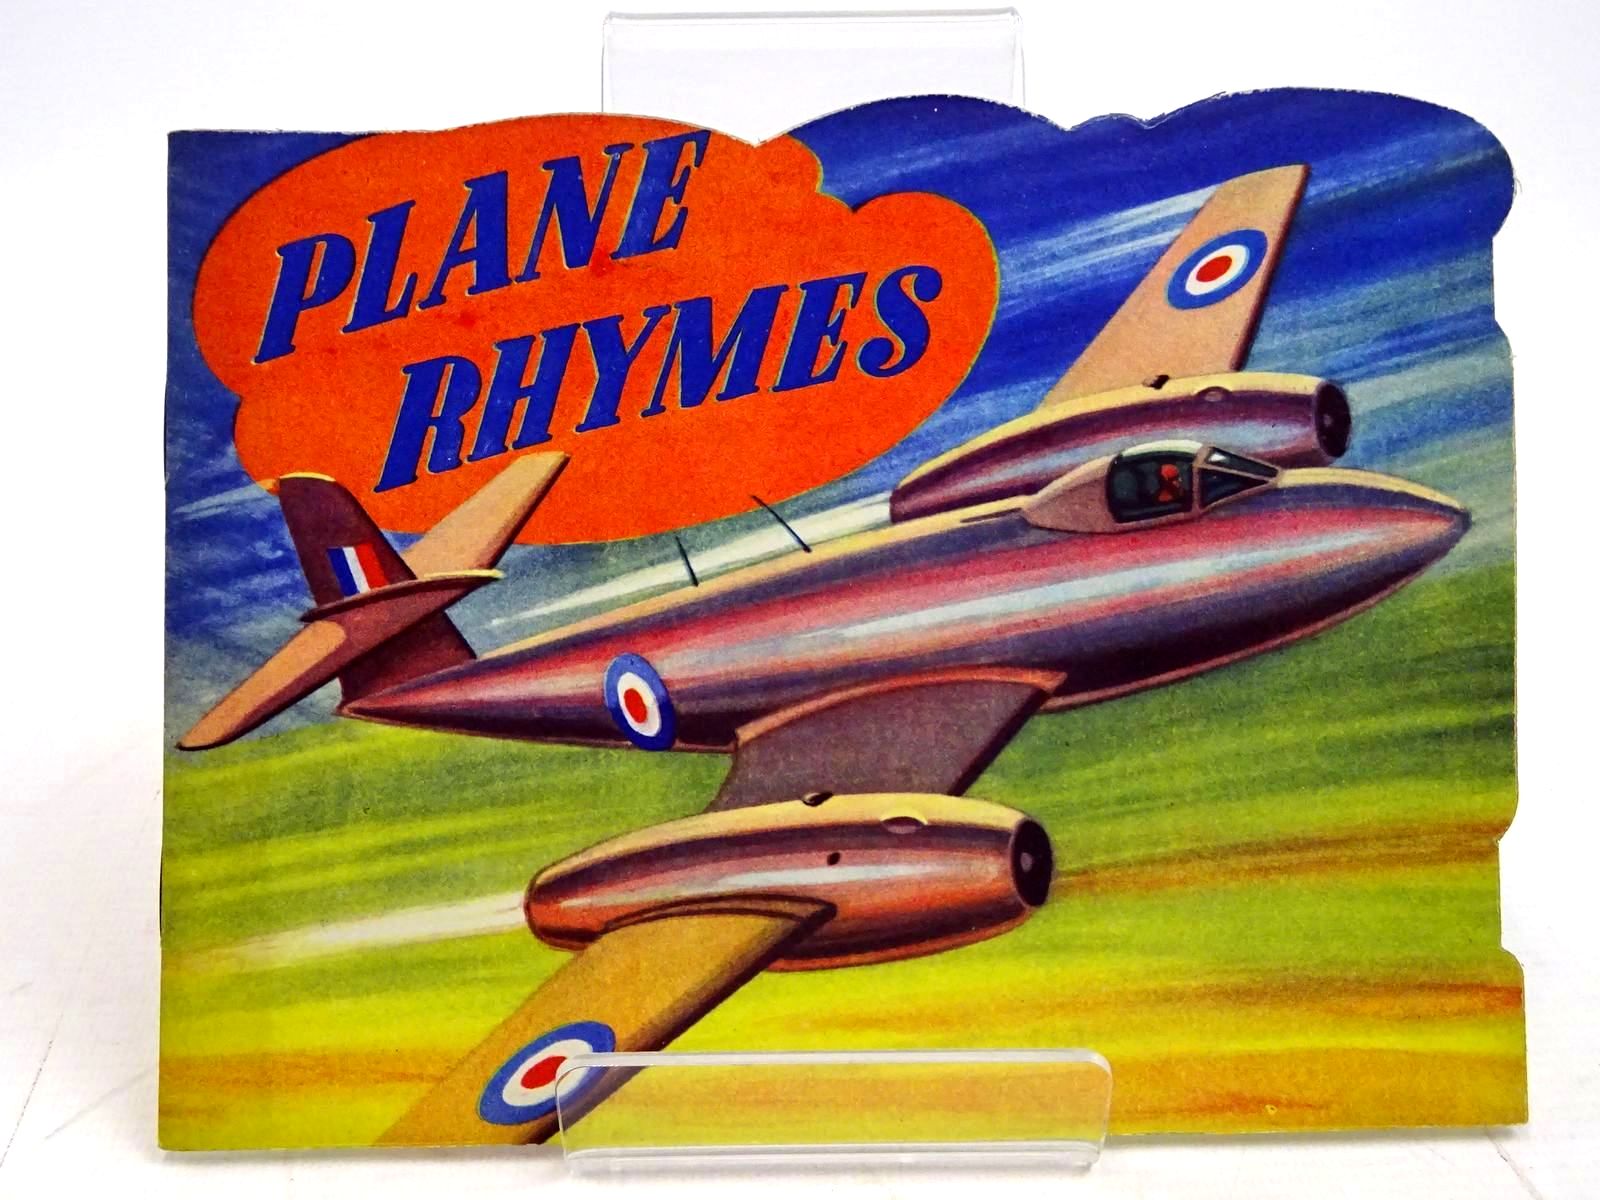 Photo of PLANE RHYMES published by Birn Brothers Ltd. (STOCK CODE: 2131557)  for sale by Stella & Rose's Books